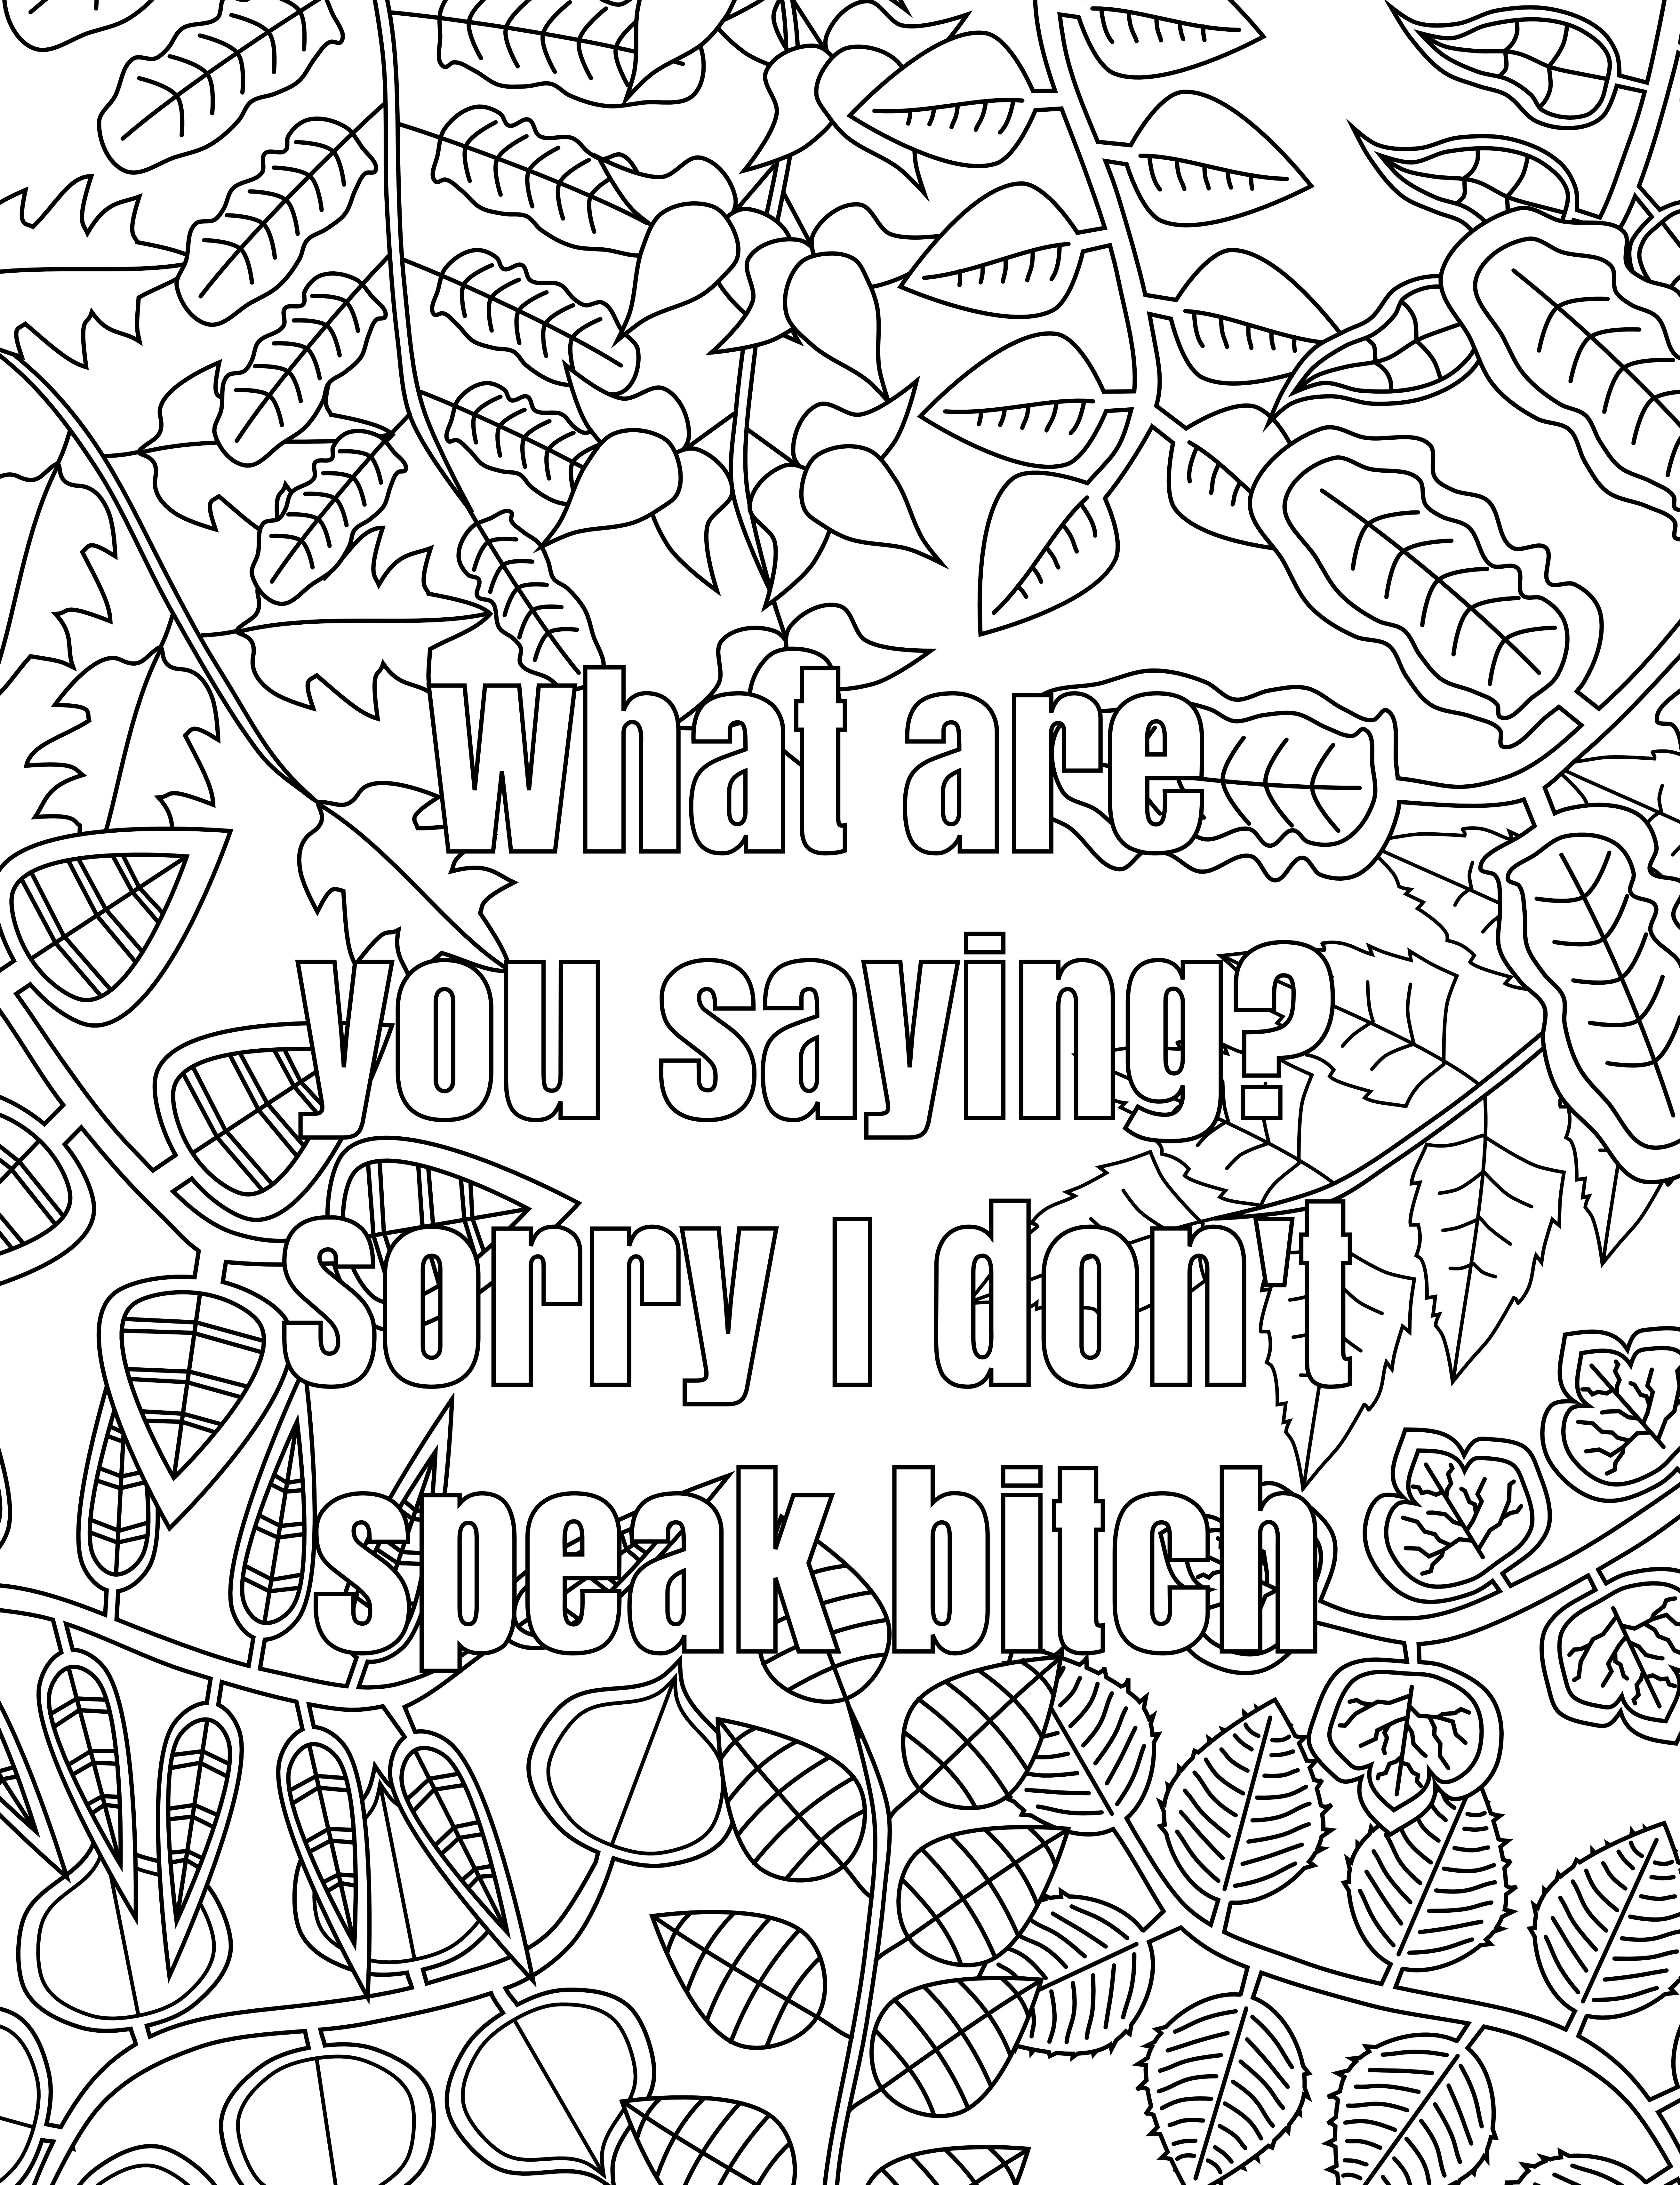 Free Printable Coloring Pages For Adults Only Swear Words Download - Free Printable Swear Word Coloring Pages